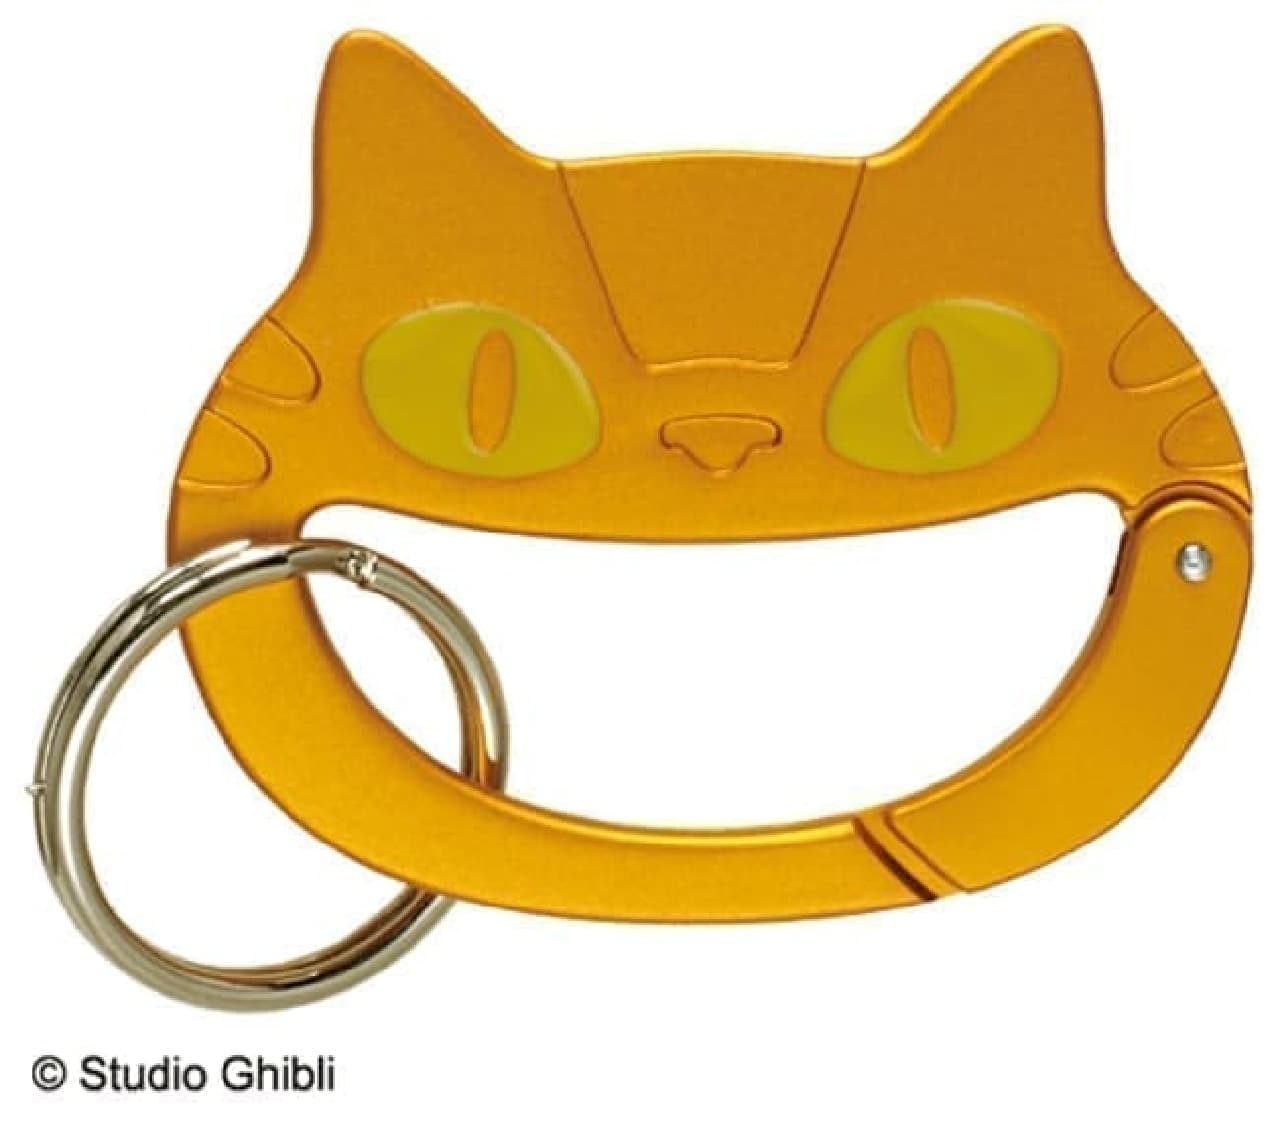 Totoro's carabiner from Ghibli "GBL" for adults